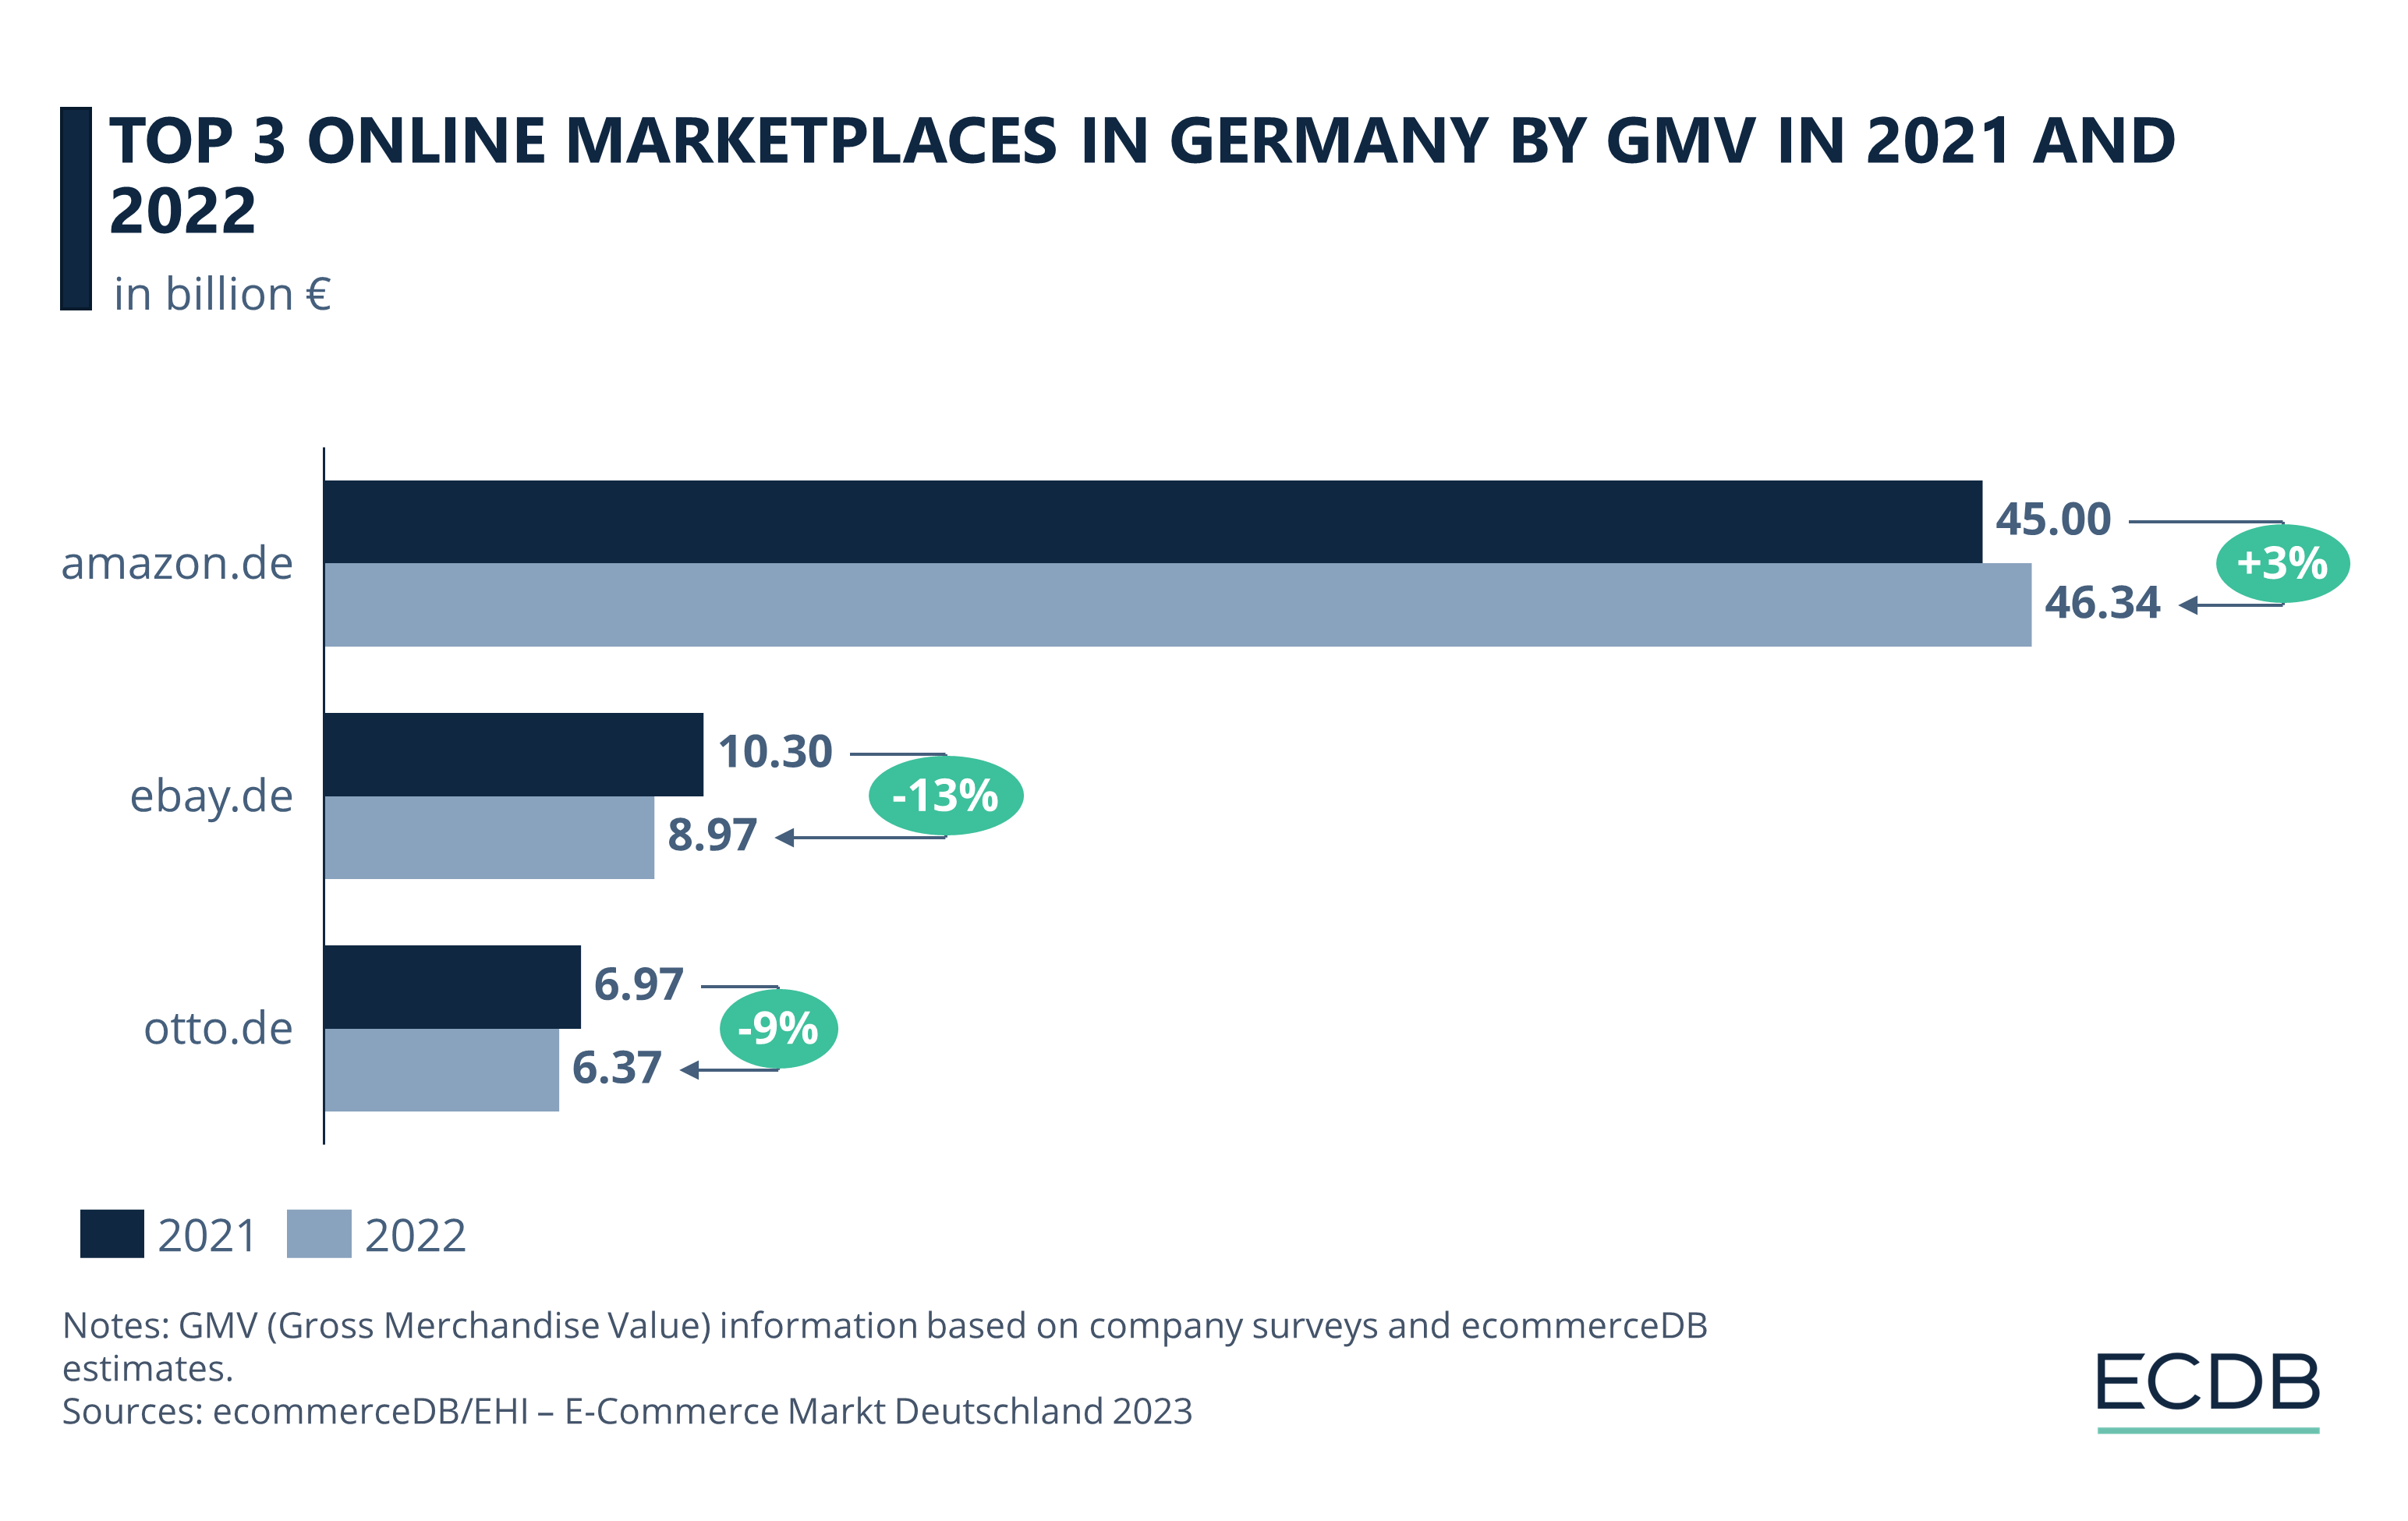 Top 3 Marketplaces in Germany, 2021-2022 and Growth